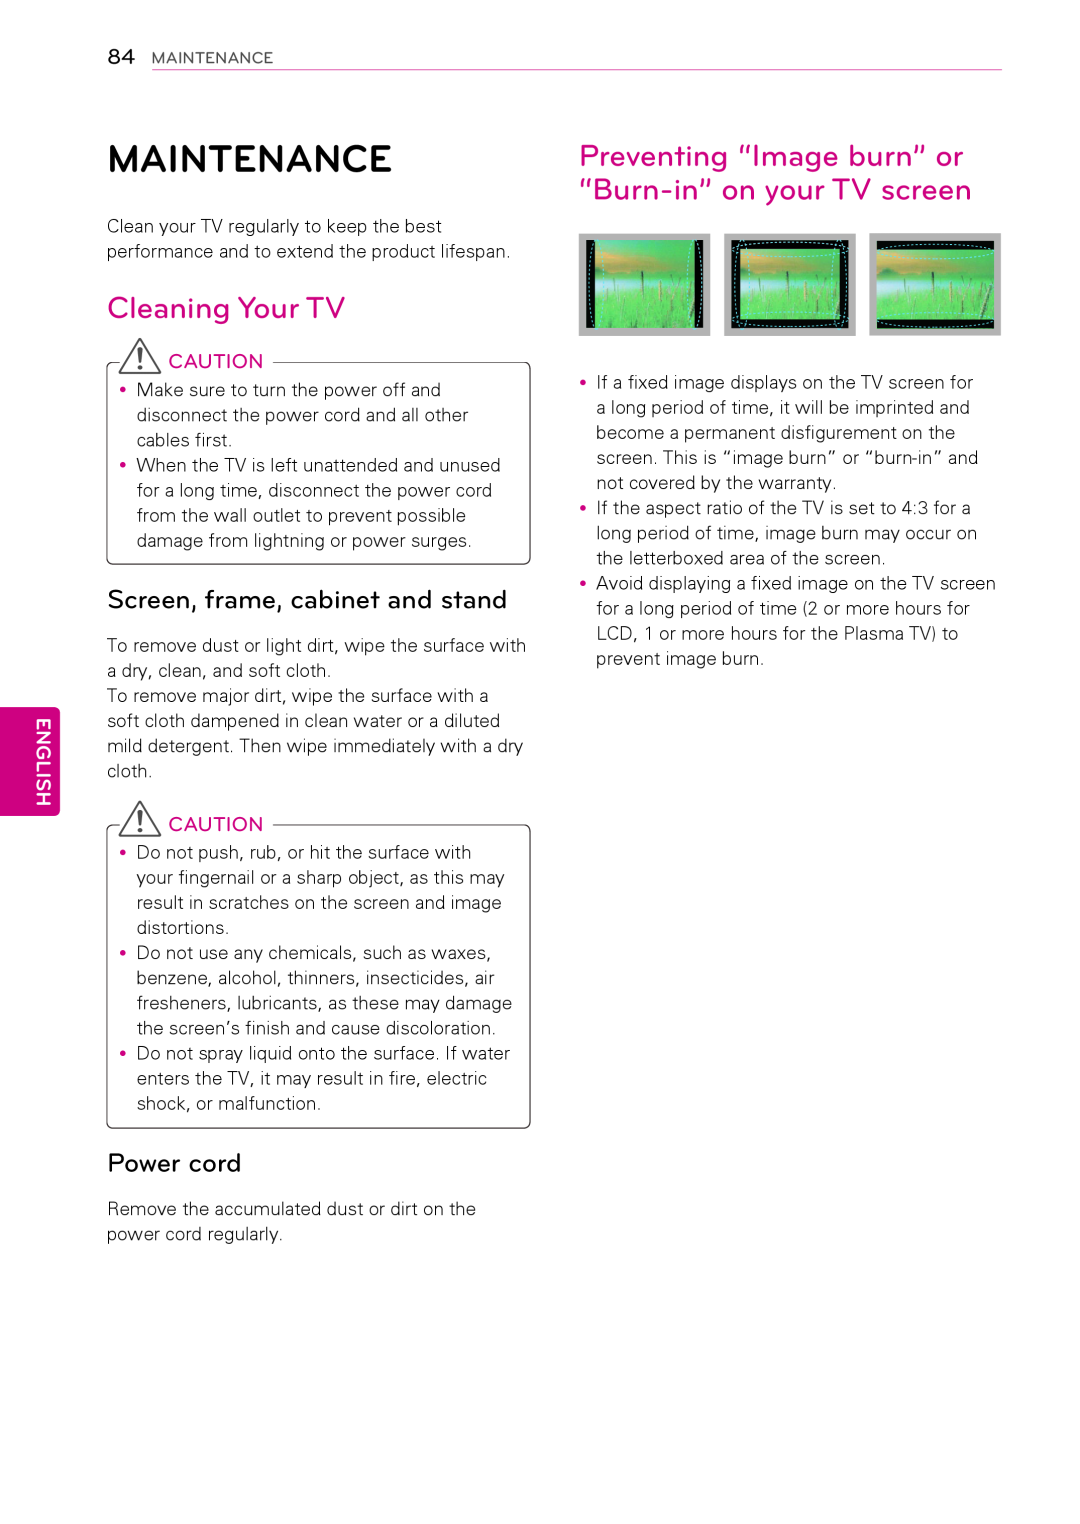 LG Electronics 50PA550C Preventing “Image burn” or, “Burn-in” on your TV screen, Cleaning Your TV, Power cord, Maintenance 